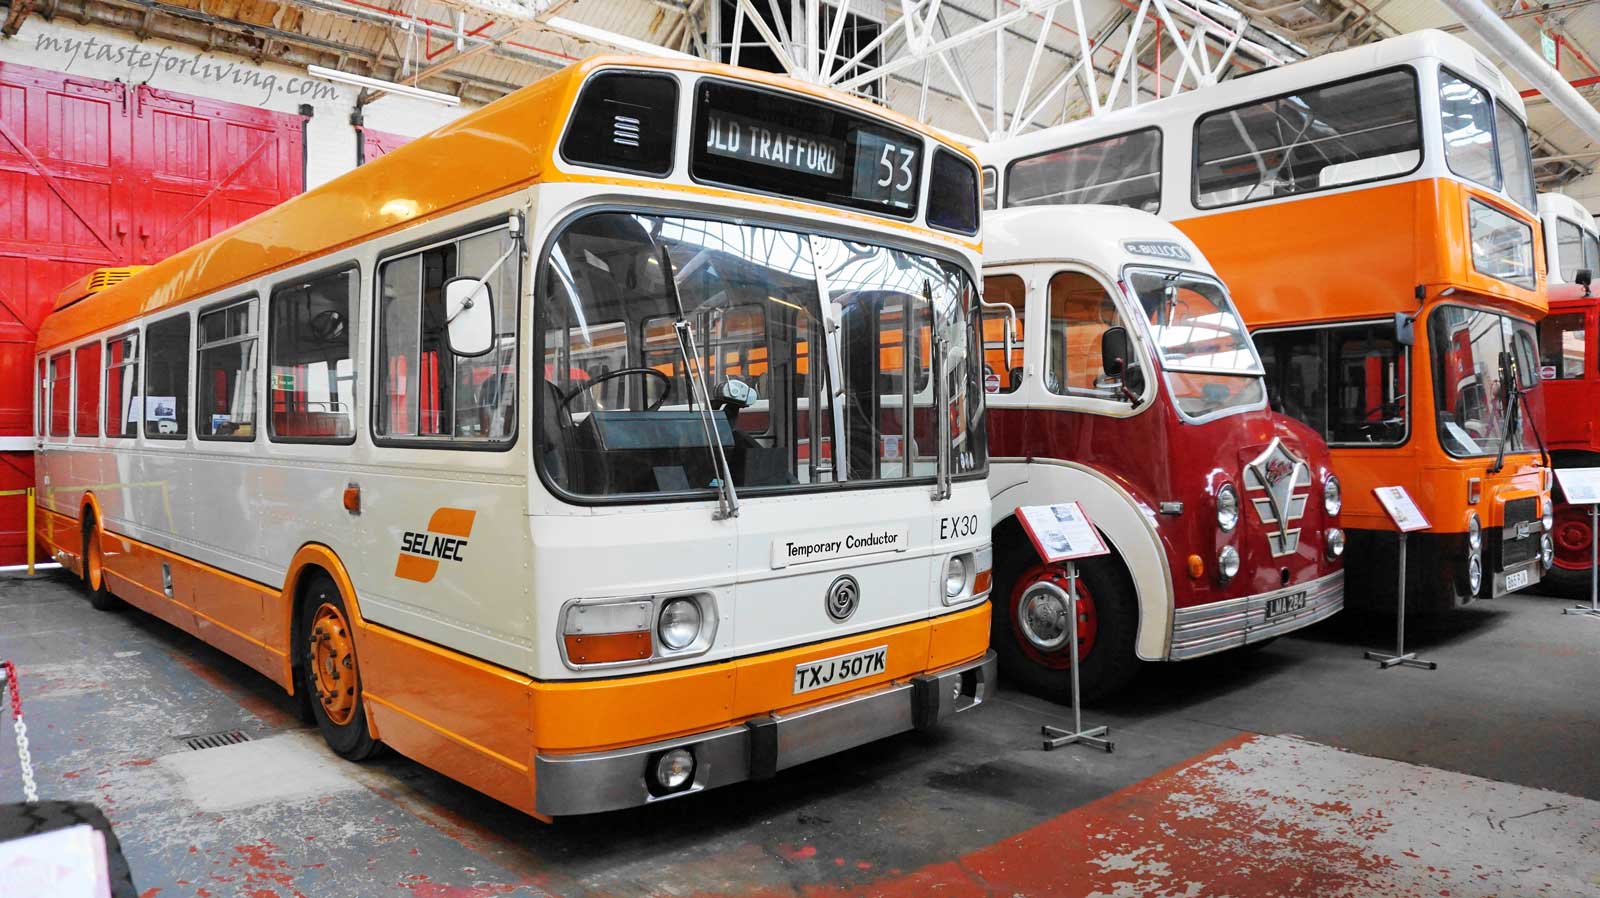 The Museum of Transport in the city of Manchester, England, was opened in 1979 years. Its collected over 100 years of the history of public road transport in the city.